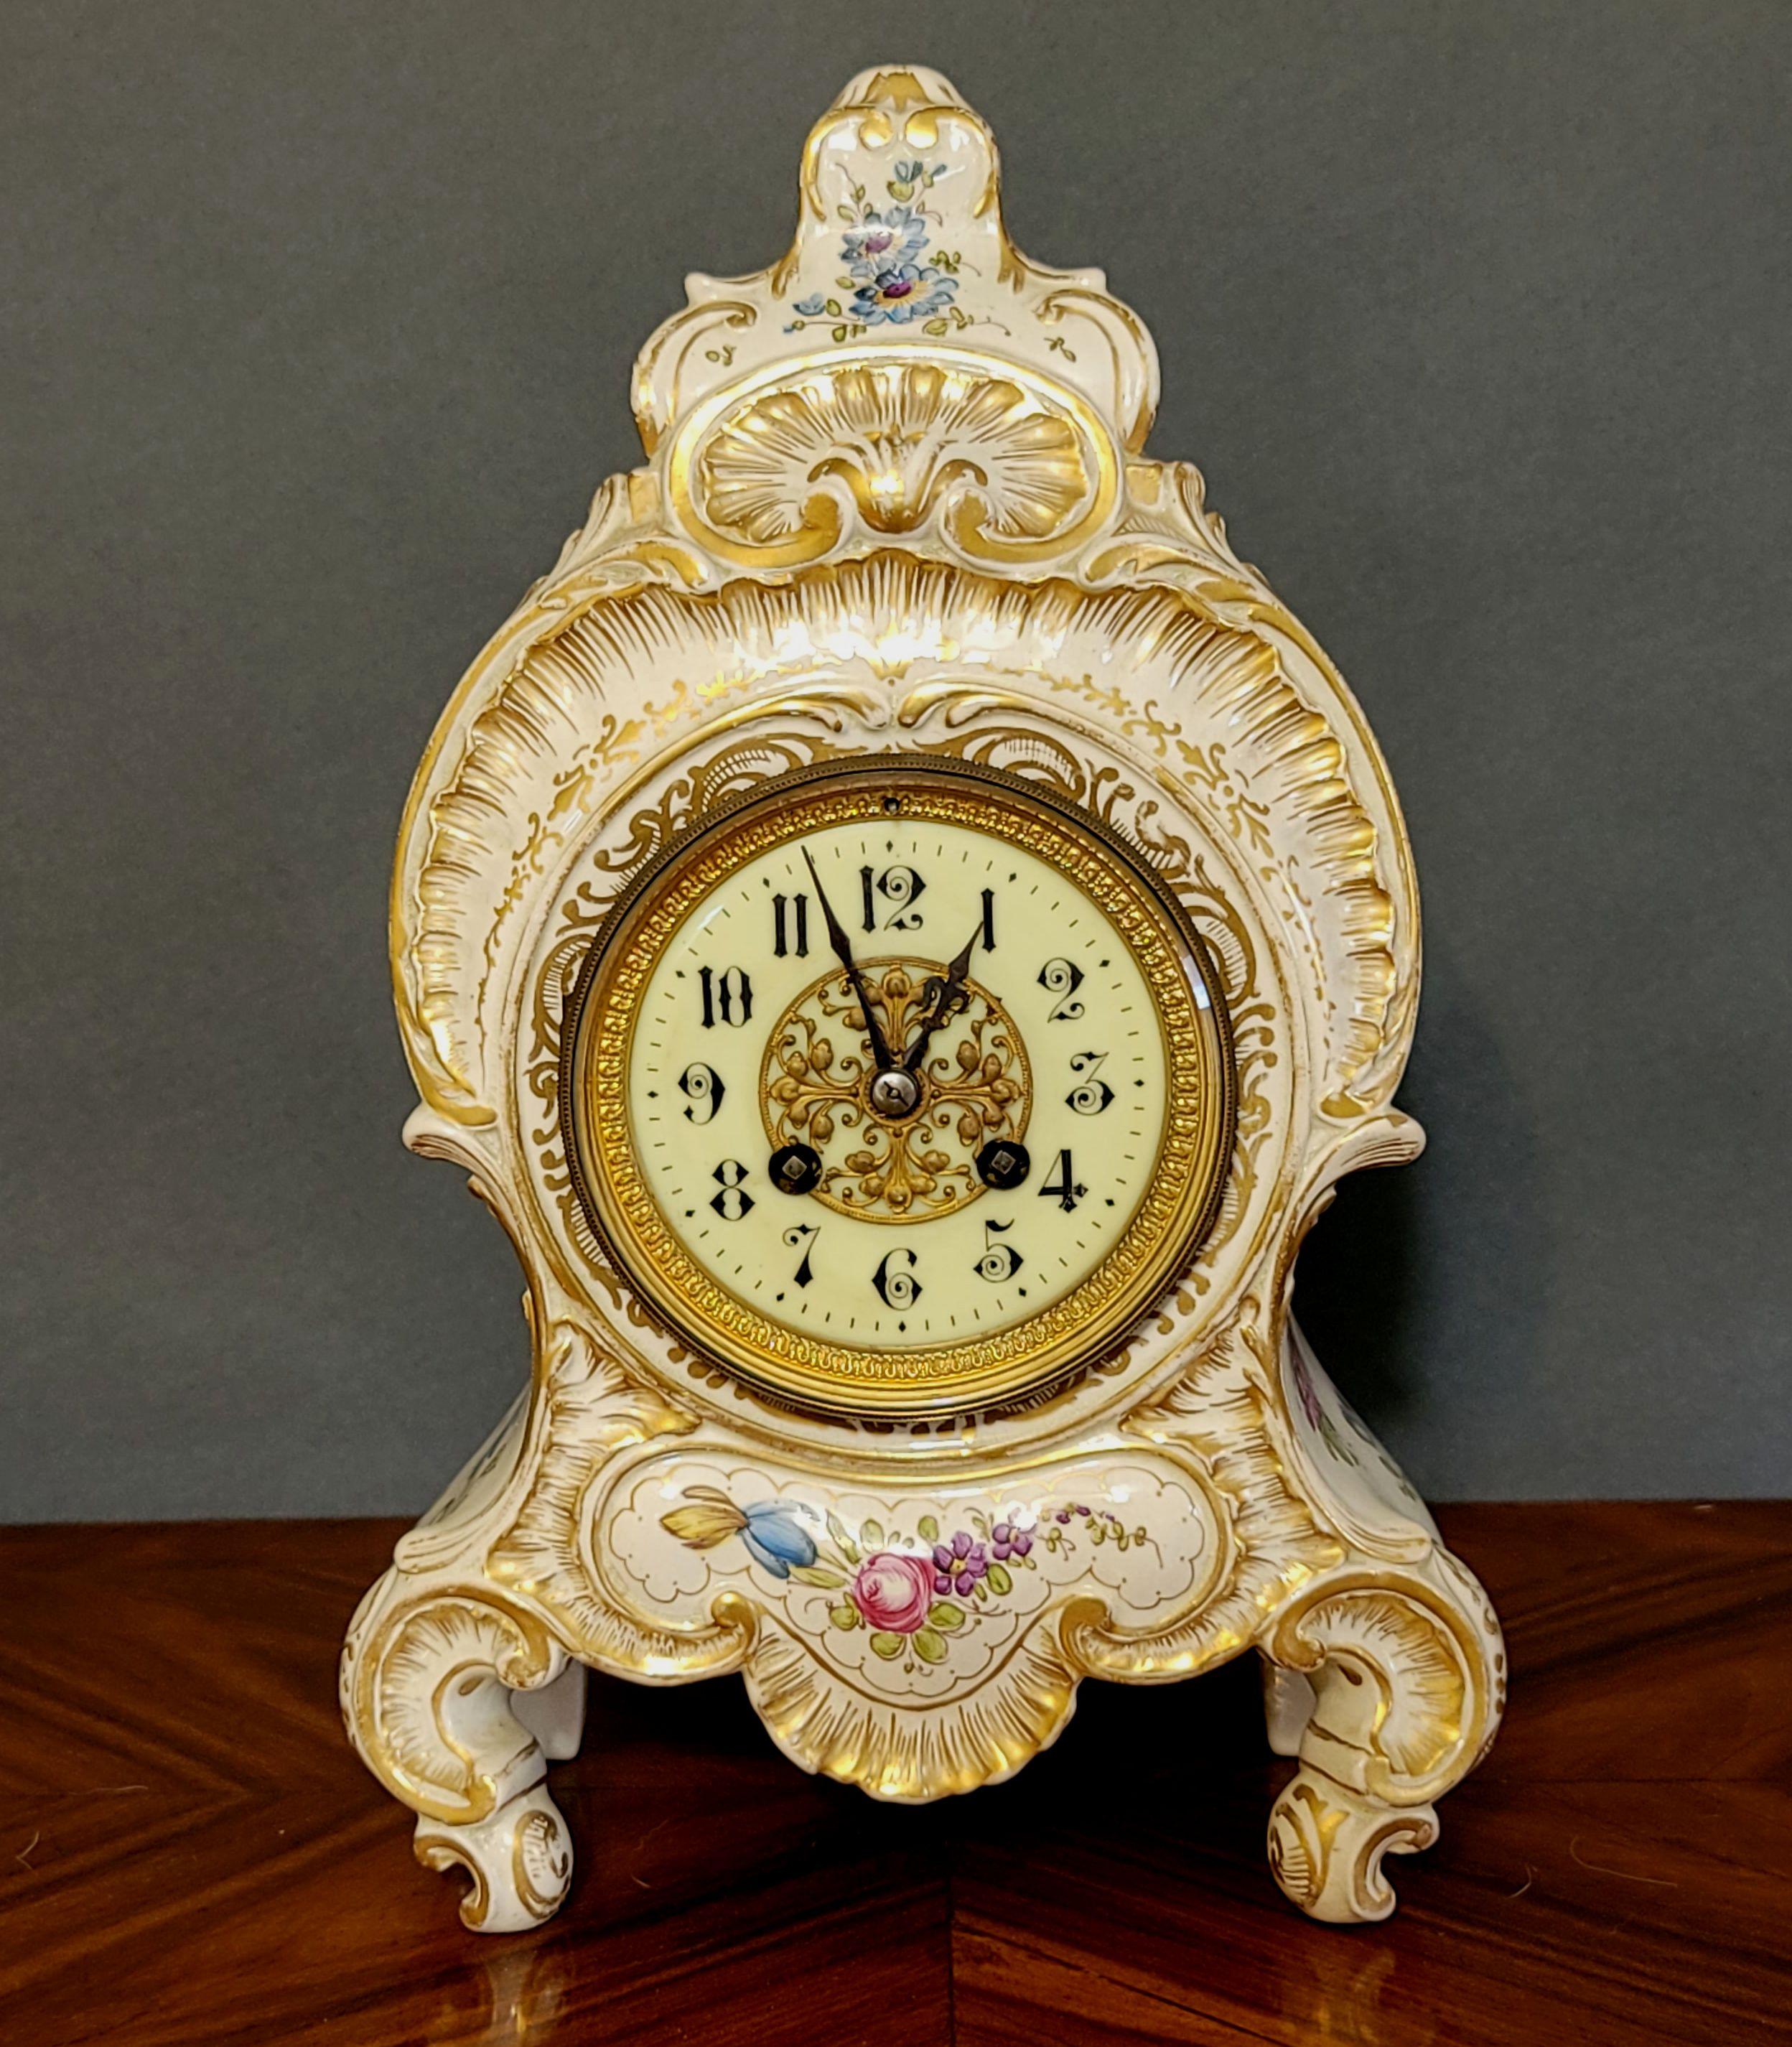 A hand-decorated with a floral motif for Bailey Banks and Biddle jewelers and gilt through the entire body. The painted porcelain dial on this clock is absolutely charming with hand-painted Arabic numerals in very delicate art writing, faux bois